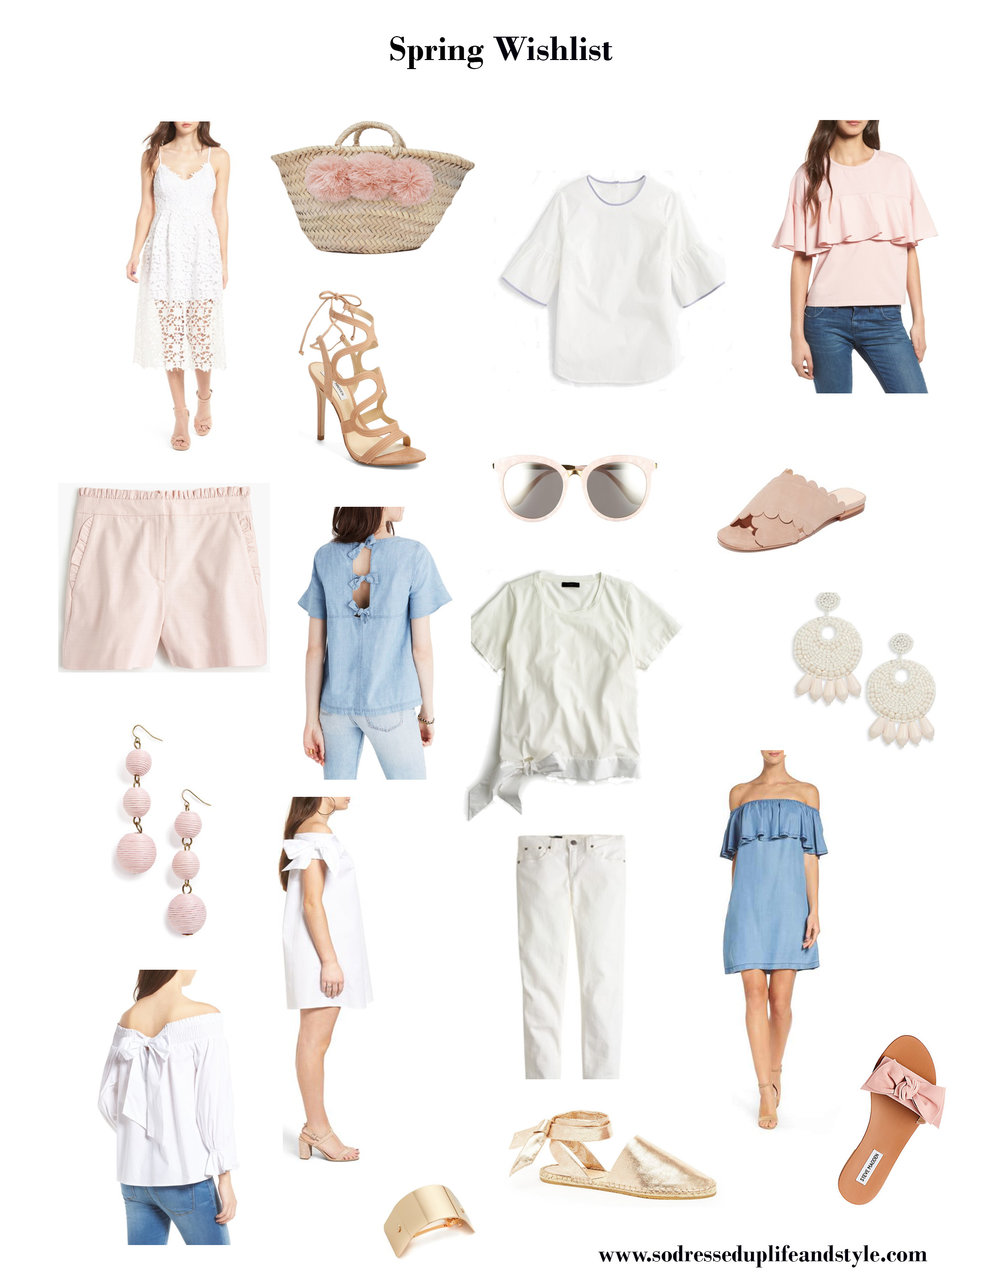 Spring Wishlist: 19 Items for Spring — So Dressed Up Life + Style